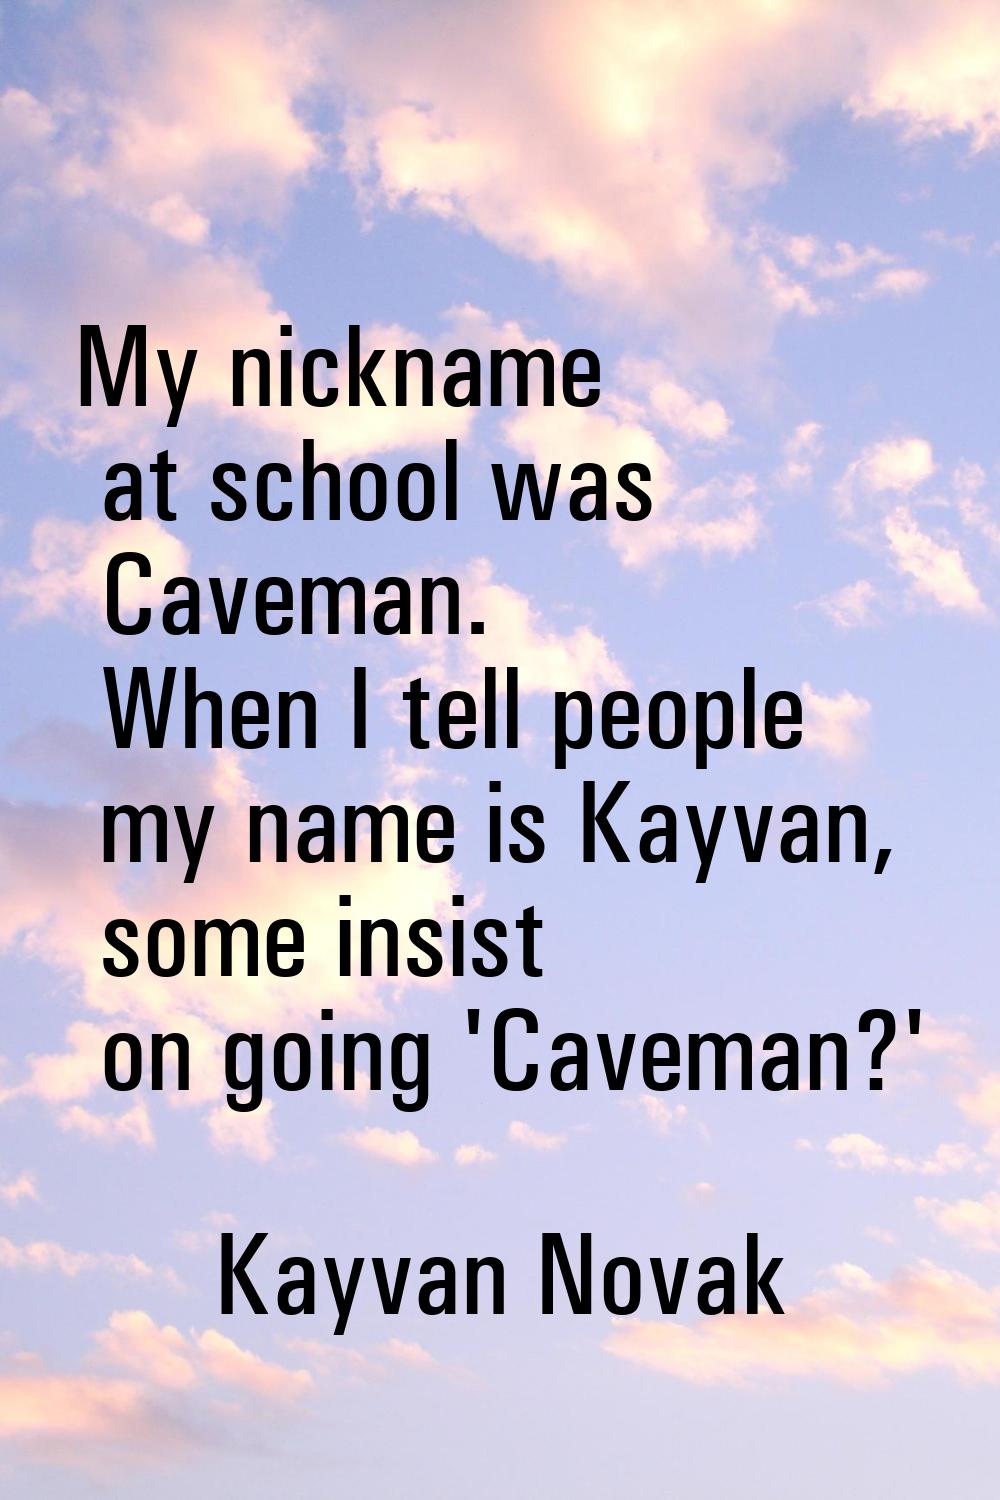 My nickname at school was Caveman. When I tell people my name is Kayvan, some insist on going 'Cave